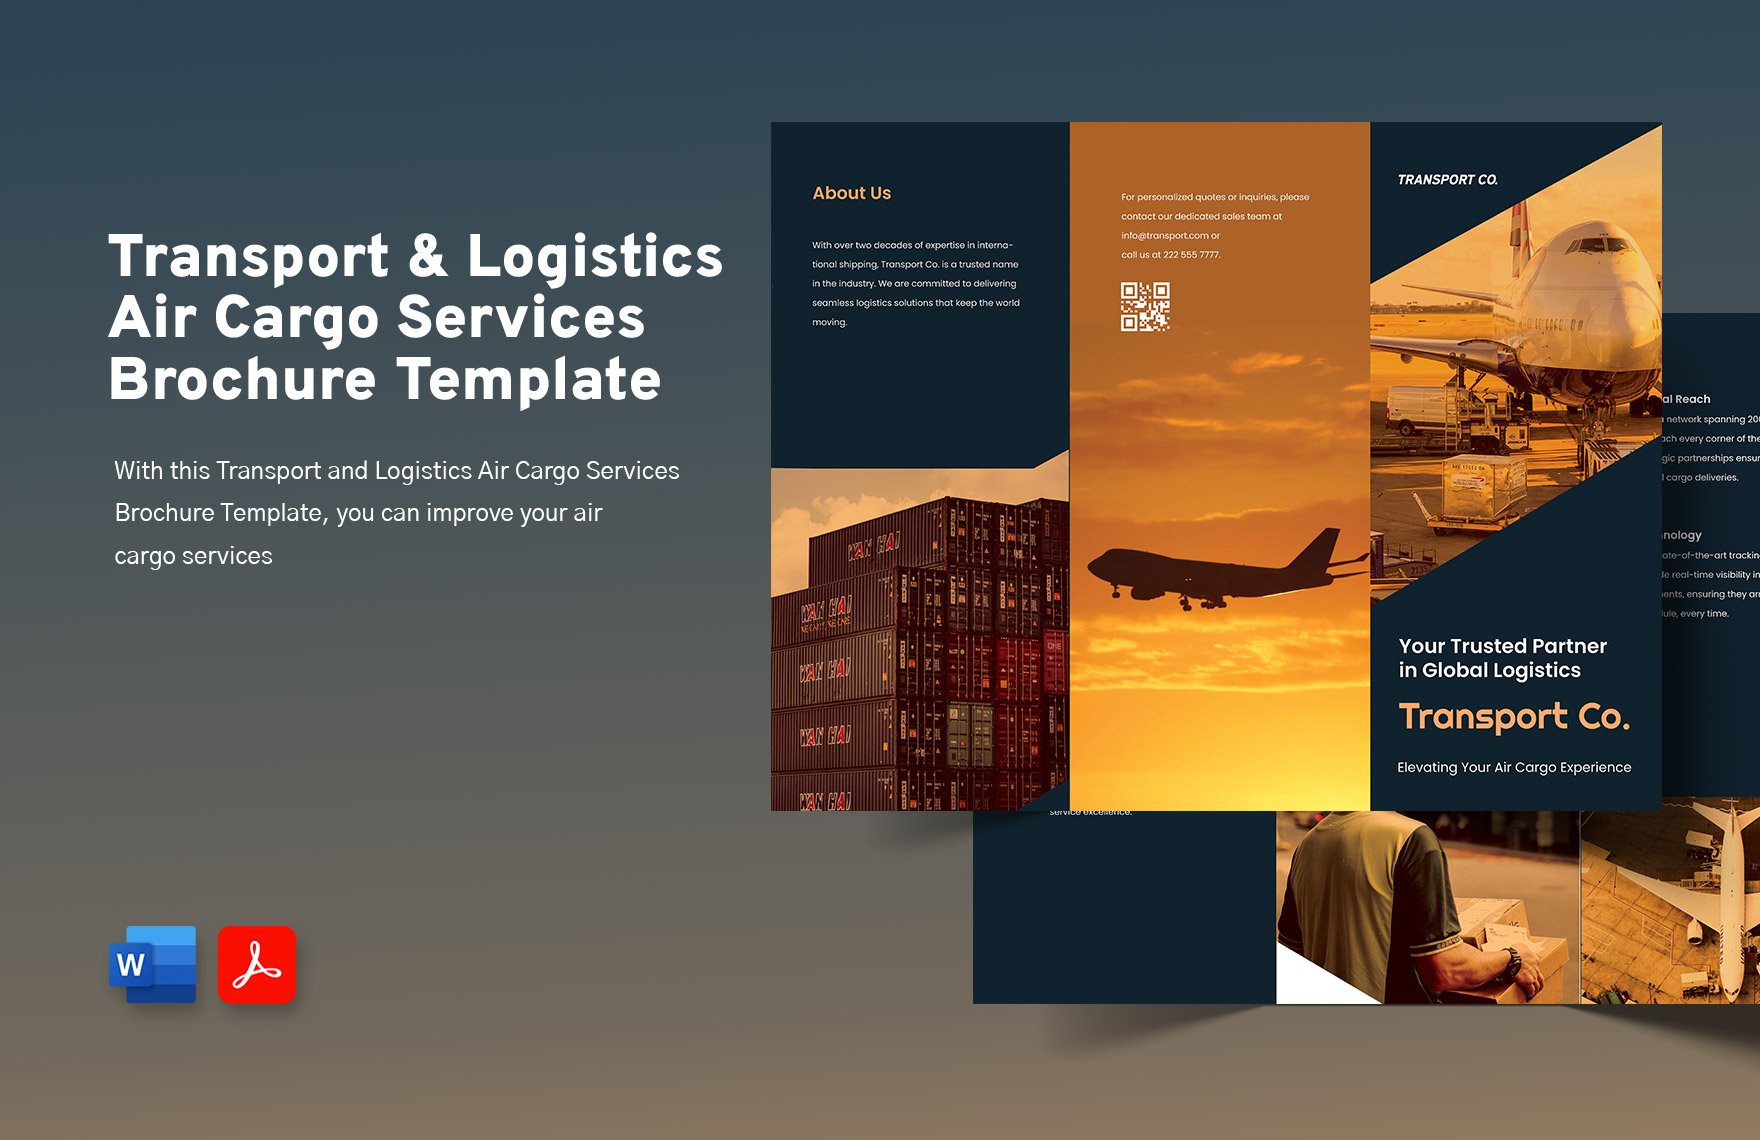 Transport and Logistics Air Cargo Services Brochure Template